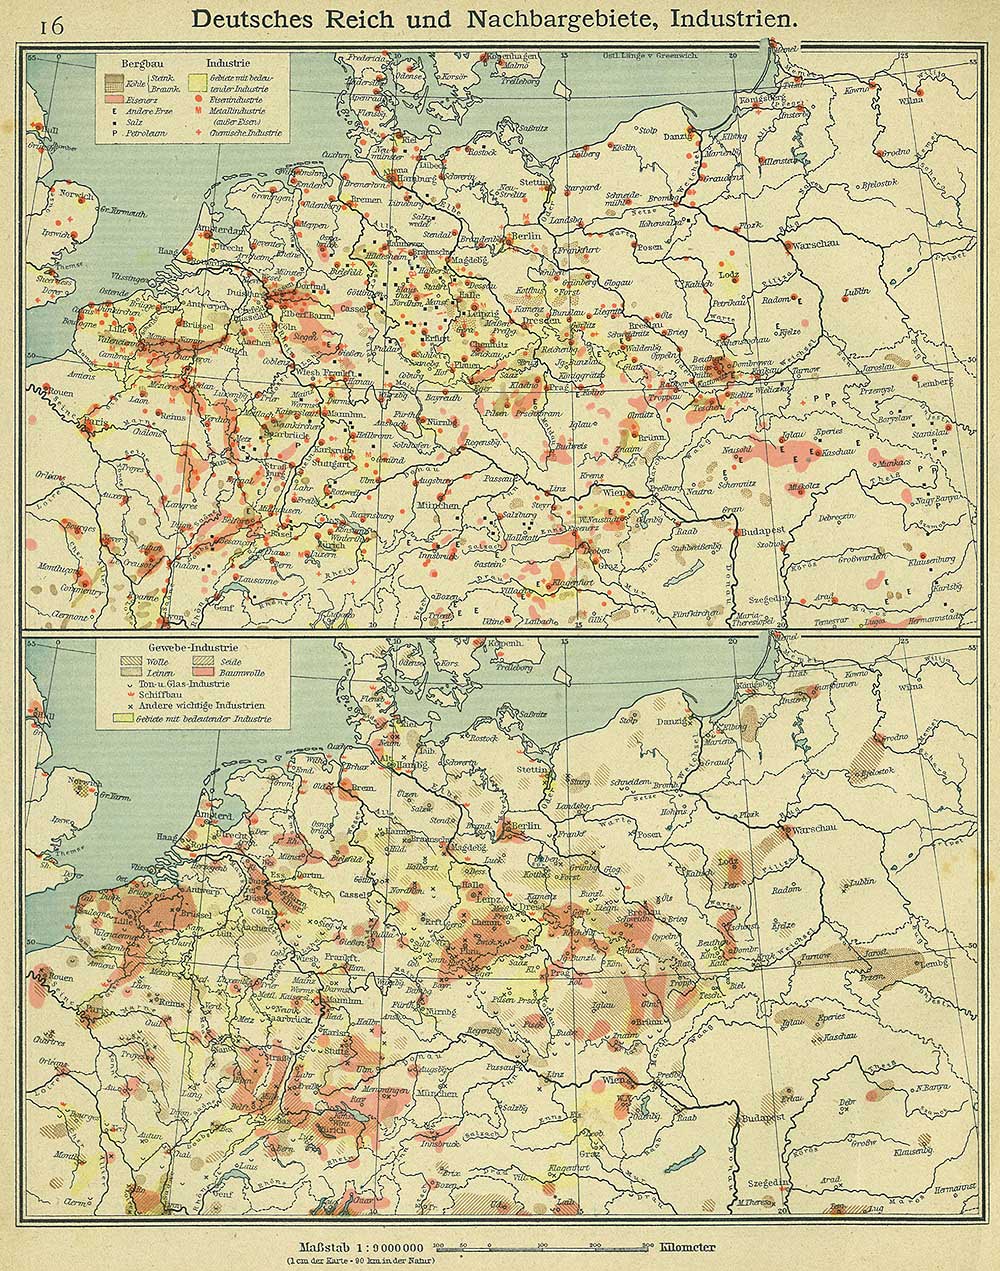 Germany and adjacent areas, industrial, Andrees 'Berliner Schul-Atlas', 1916, page 16, published size to print borders 20.47 cm wide by 26.37 cm high.